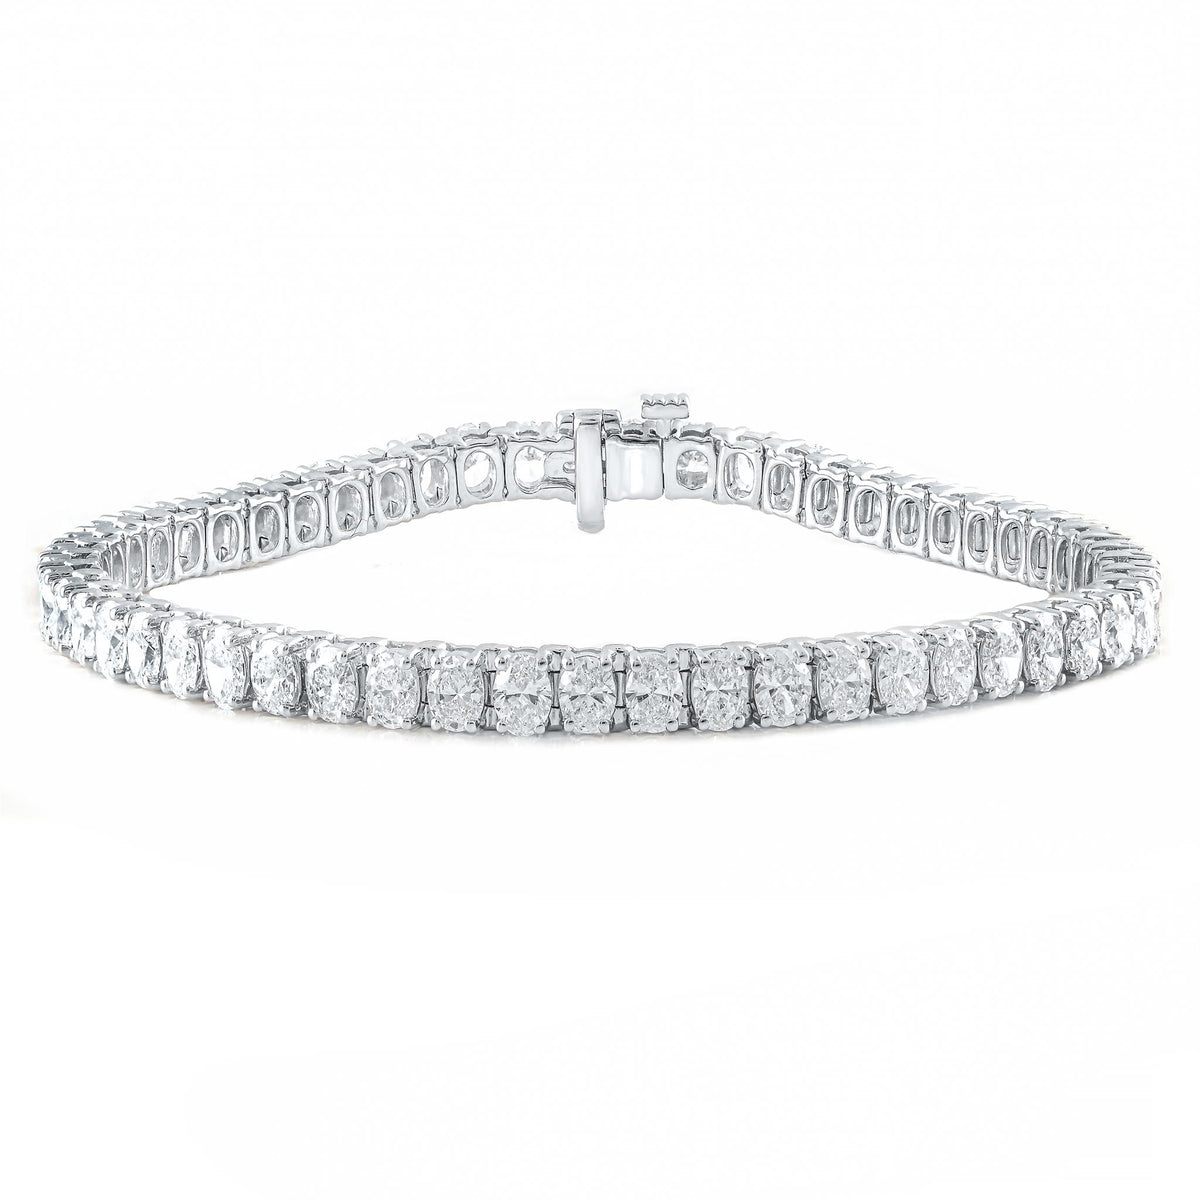 14Kt White Gold Tennis Bracelet With 8.50cttw Oval Natural Diamonds